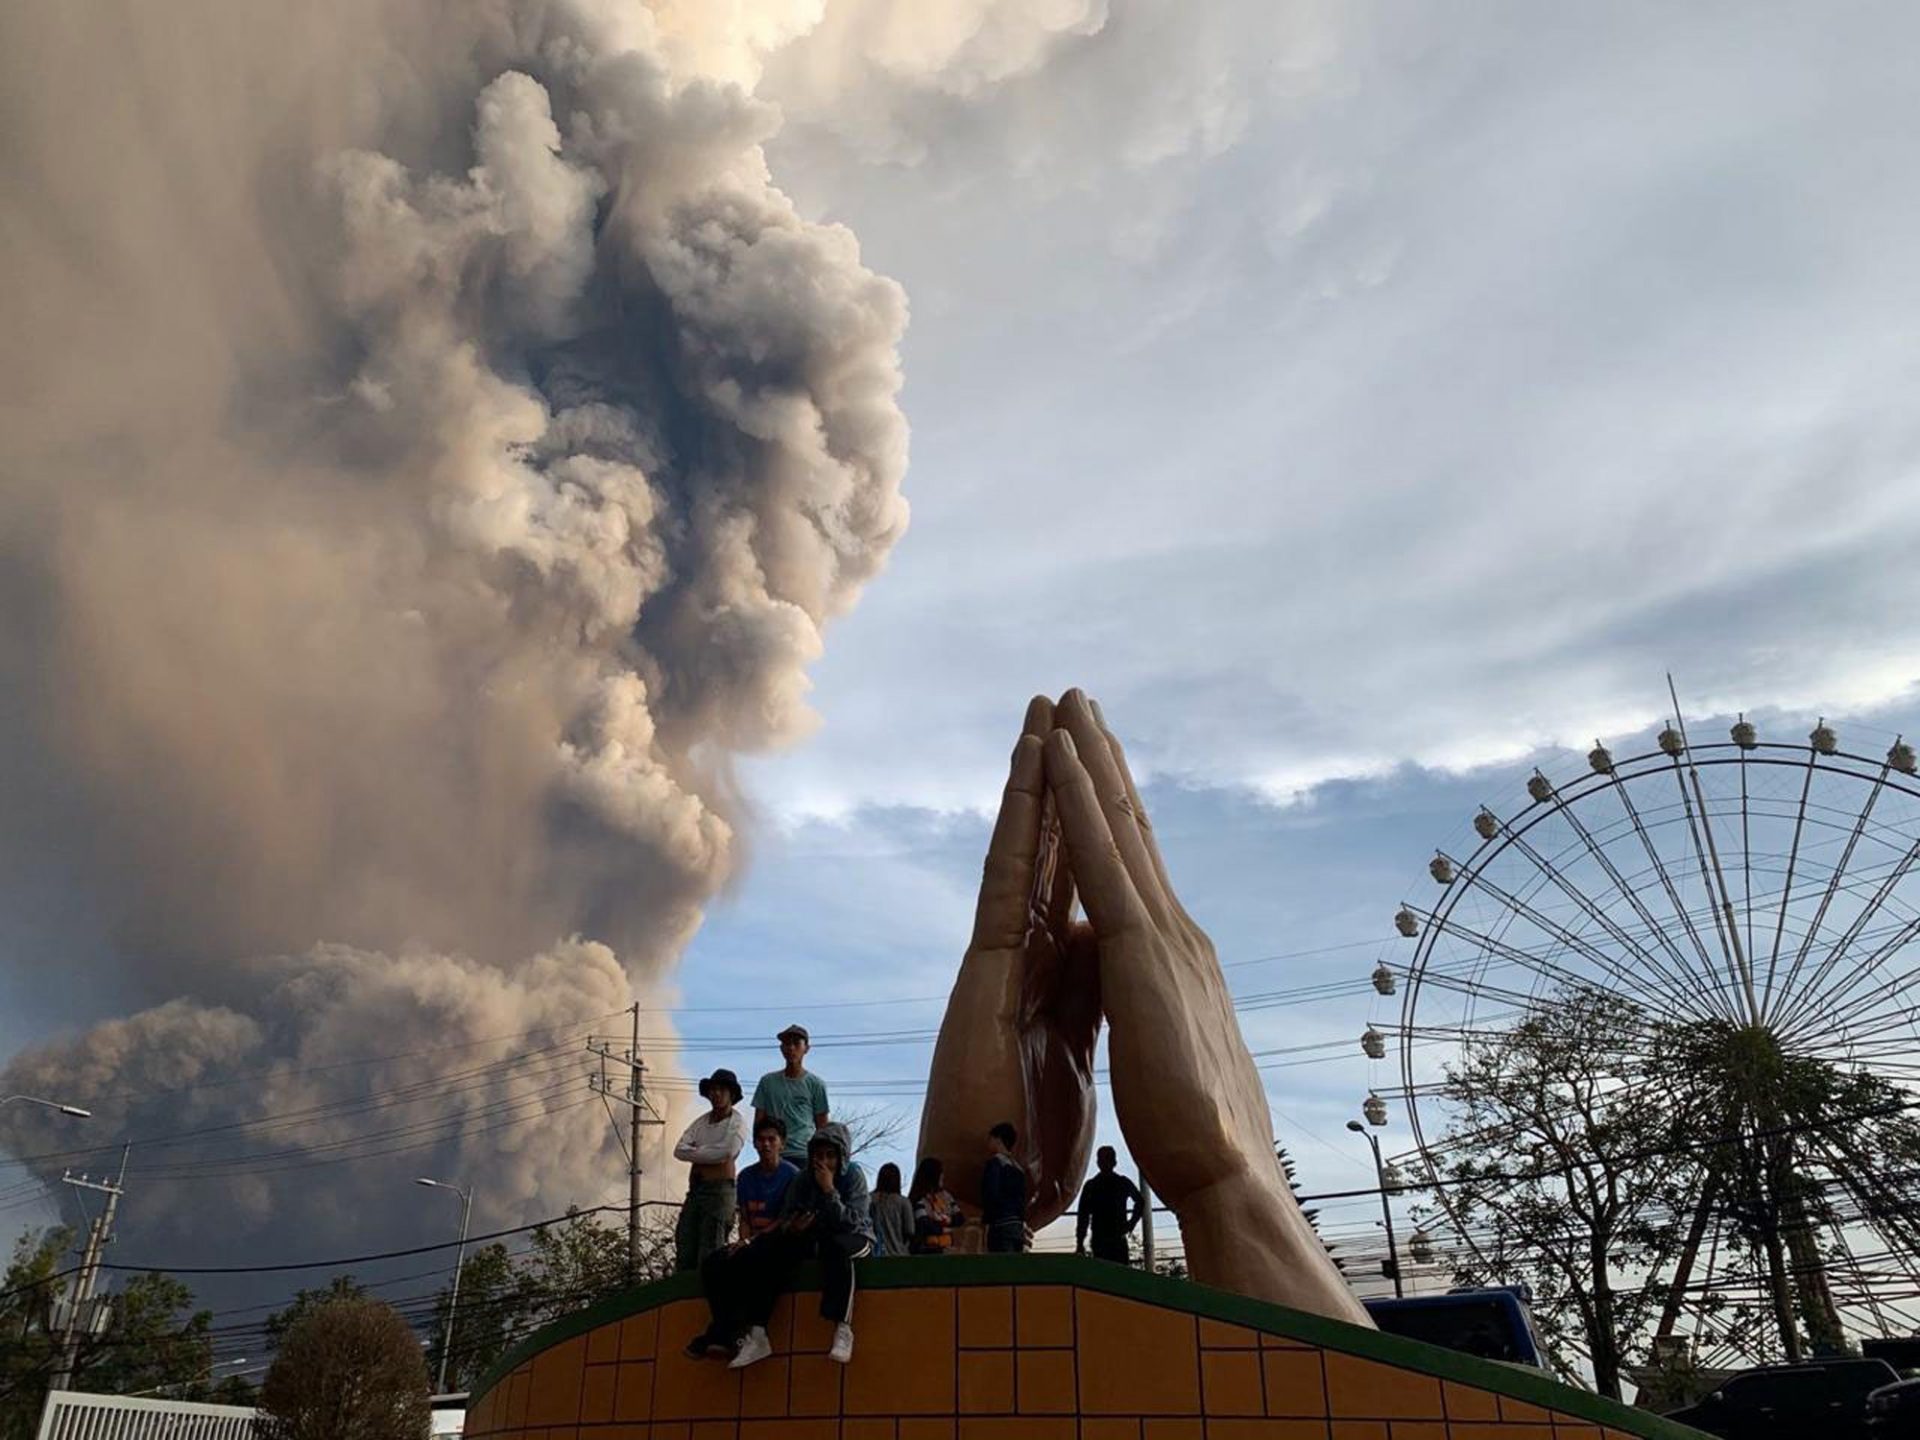 People watch as the Taal volcano spews ash and smoke during an eruption in Tagaytay, Cavite province south of Manila, Philippines on Sunday. Jan. 12, 2020. A tiny volcano near the Philippine capital that draws many tourists for its picturesque setting in a lake belched steam, ash and rocks in a huge plume Sunday, prompting thousands of residents to flee and officials to temporarily suspend flights.